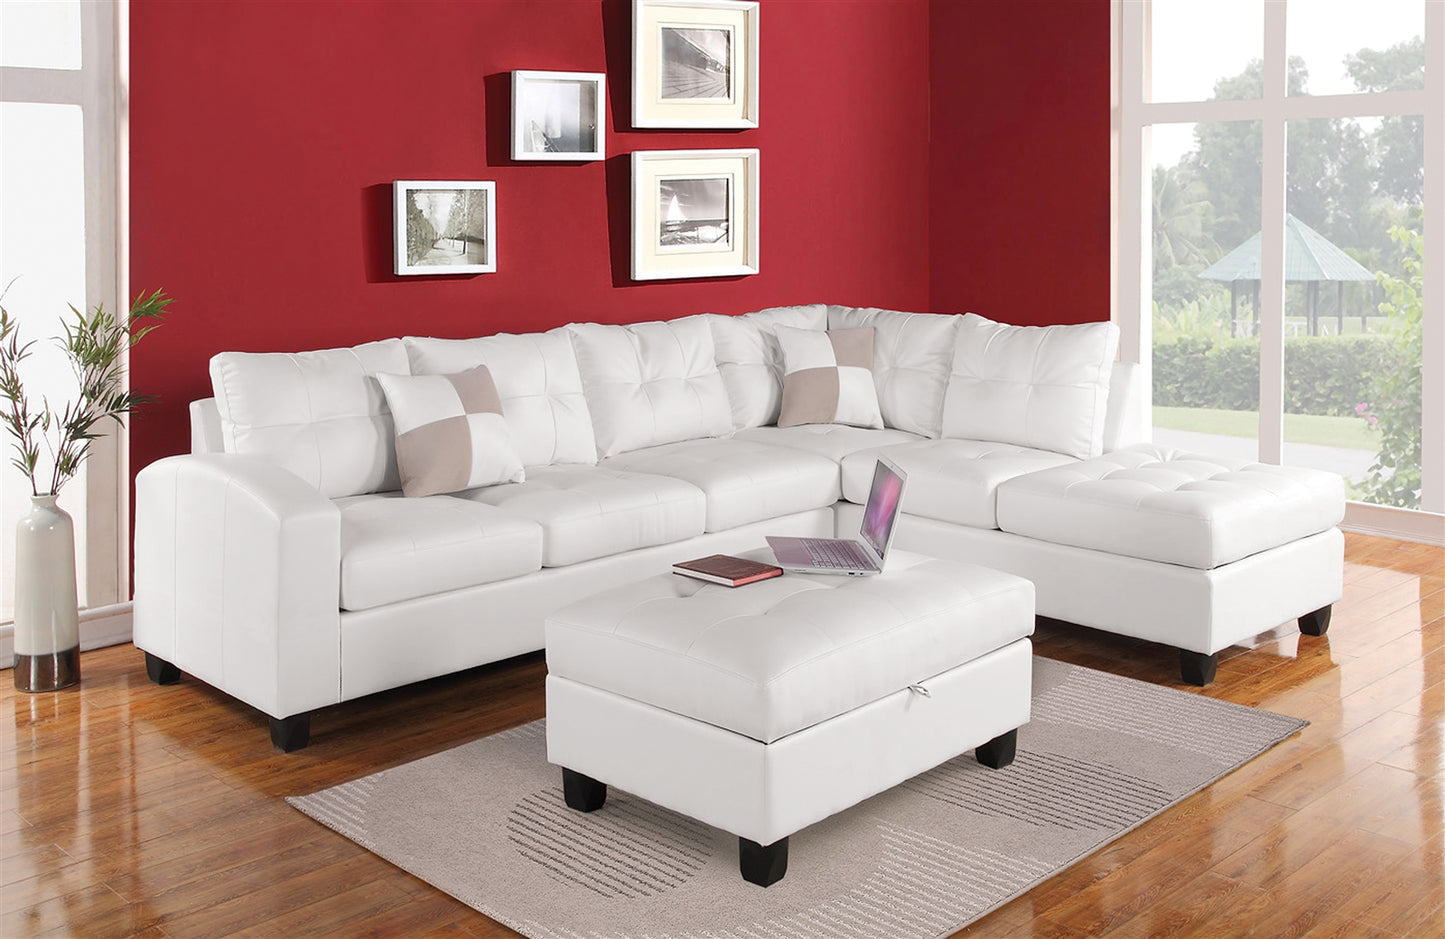 Kiva Contemporary White Leather Sectional - ACME